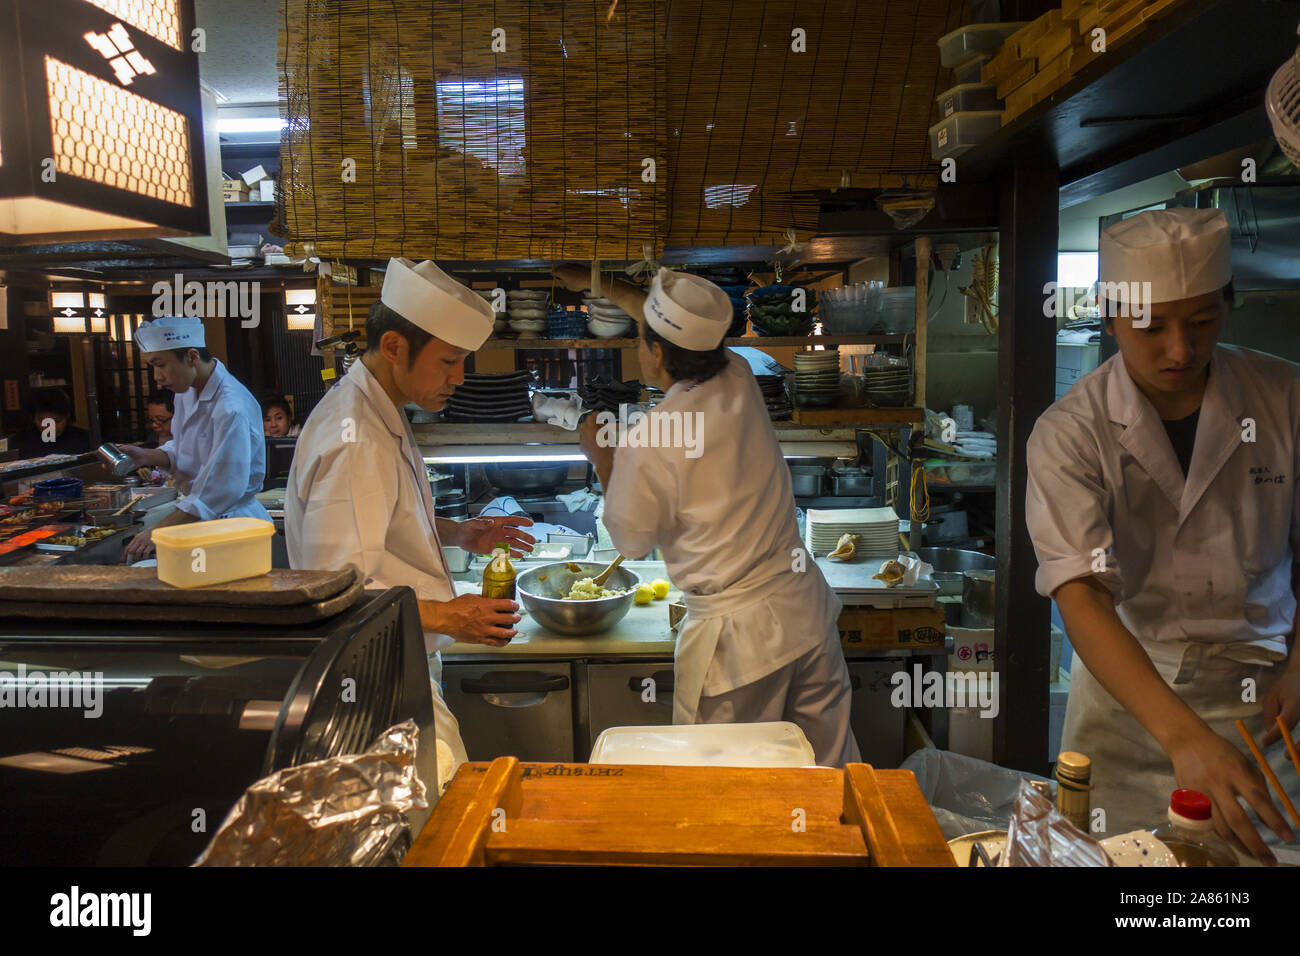 Kyoto, Japan - October 29th, 2019: Chef cooking inside a Izakaya, a sort of after work casual dining place. Stock Photo